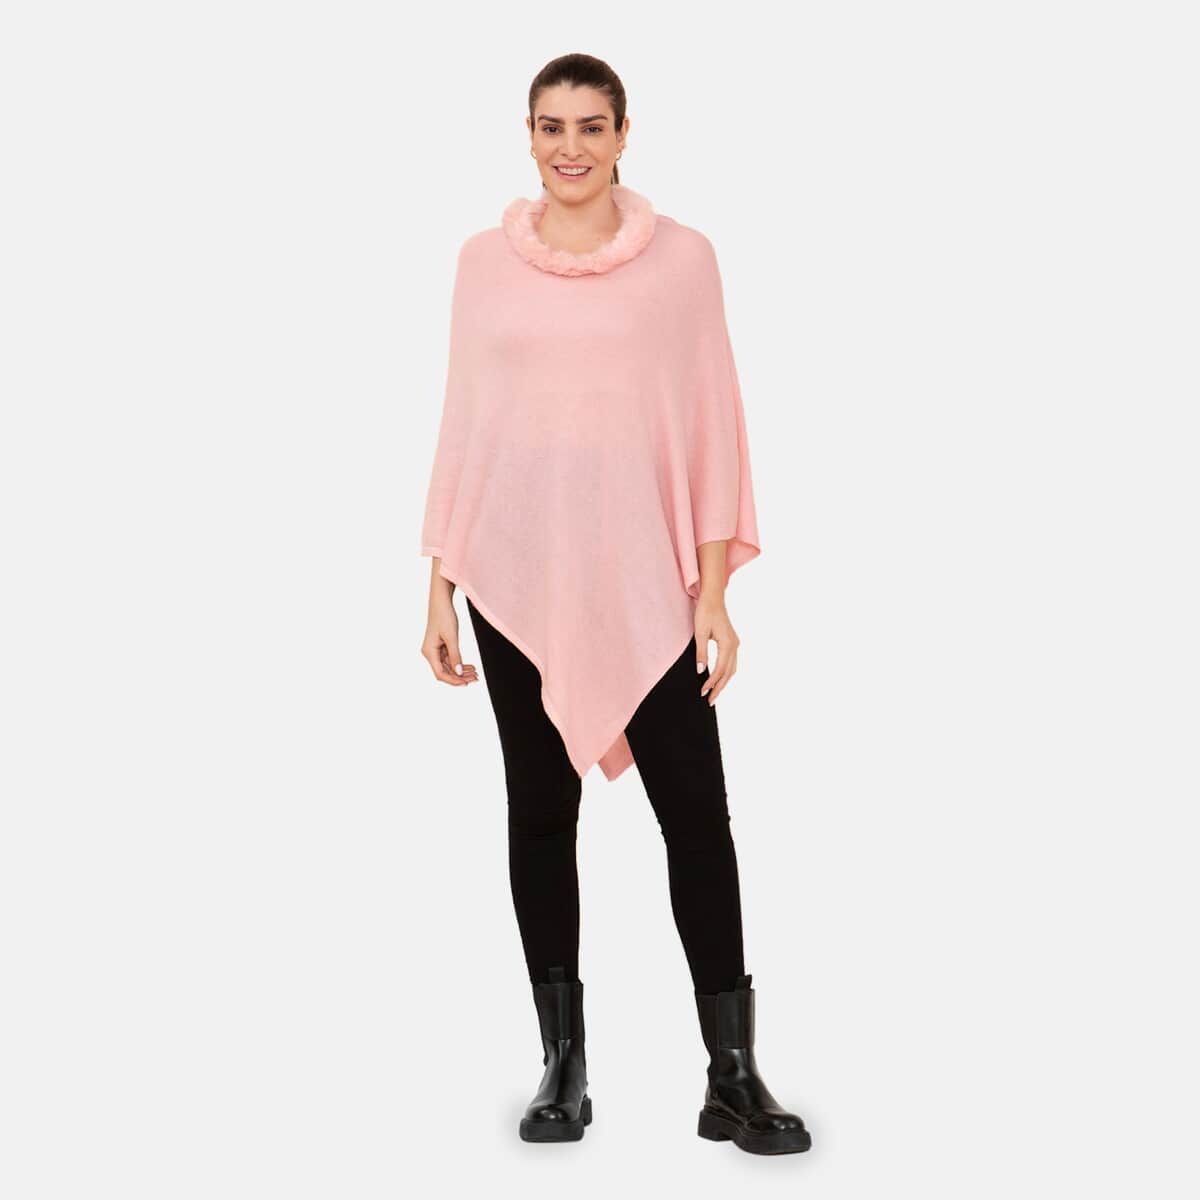 LA MAREY 100% Pashmina Cashmere Dusty Rose Designer Poncho for Women with Faux Fur Trim - One Size Fits Most , Cashmere Poncho , Women Capes , Poncho Scarf image number 0